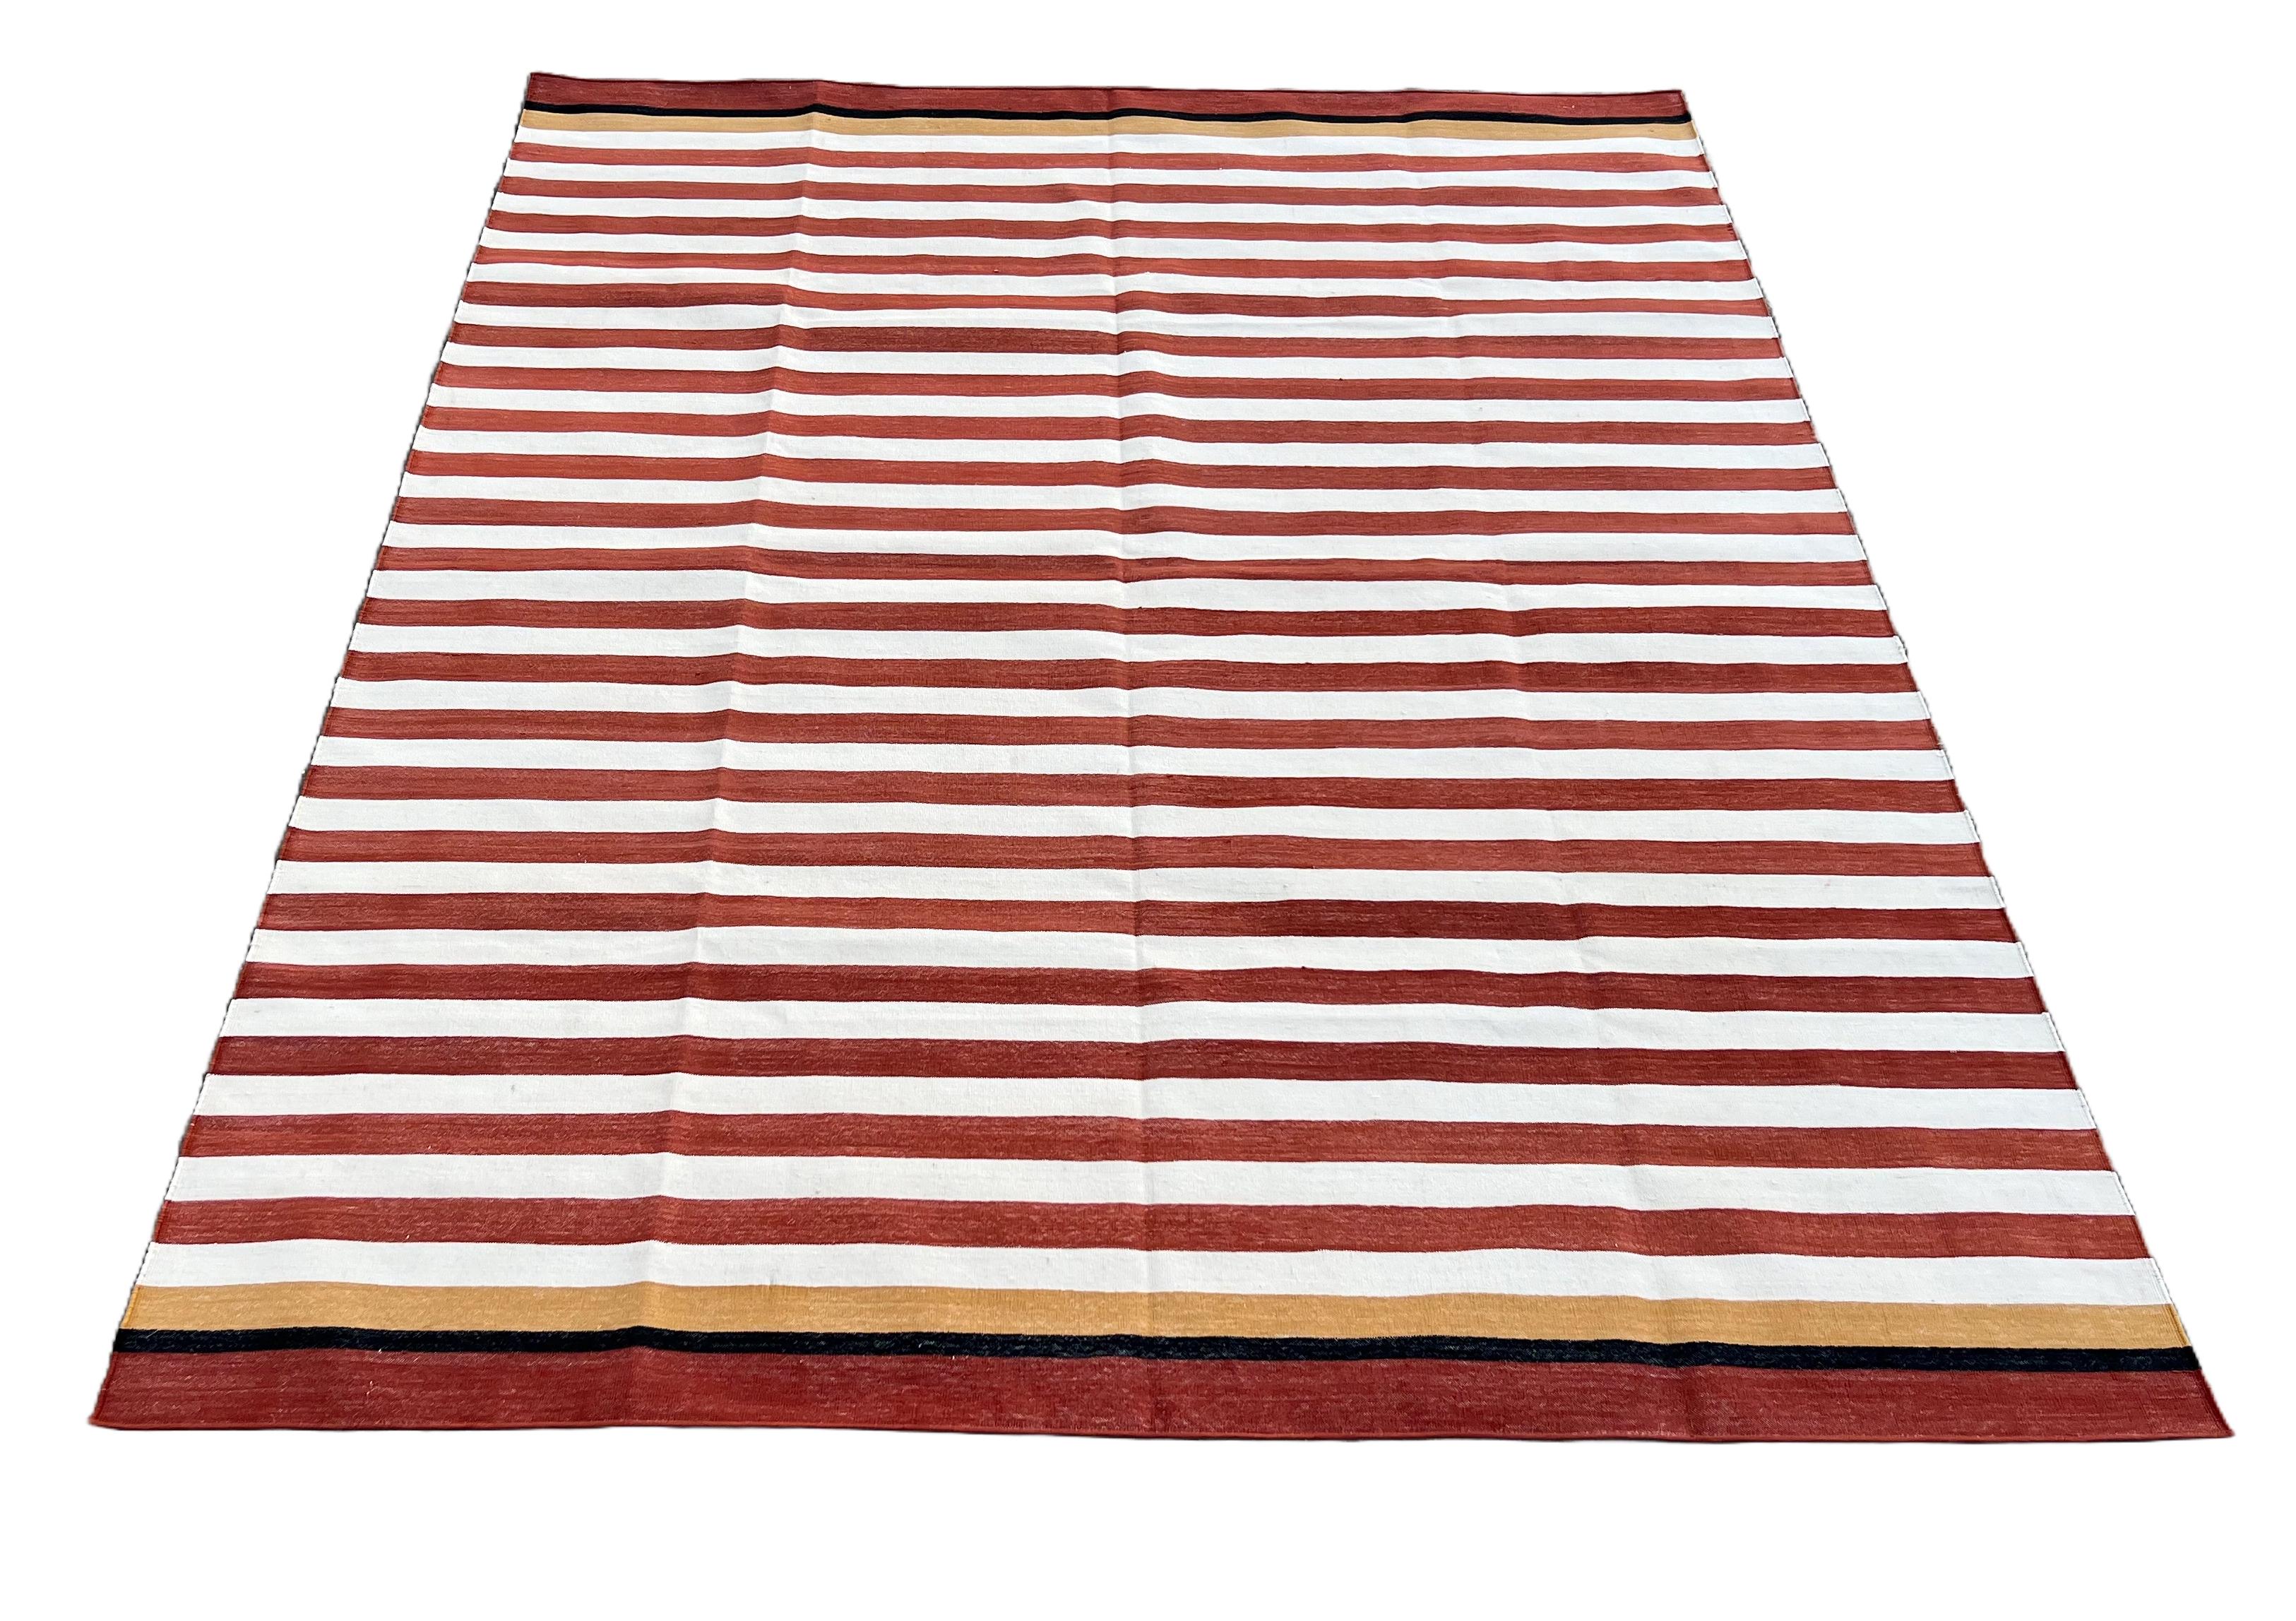 Cotton Vegetable Dyed Terracotta Red, Cream, Yellow And Black Striped Indian Dhurrie Rug-6'x9' 
These special flat-weave dhurries are hand-woven with 15 ply 100% cotton yarn. Due to the special manufacturing techniques used to create our rugs, the